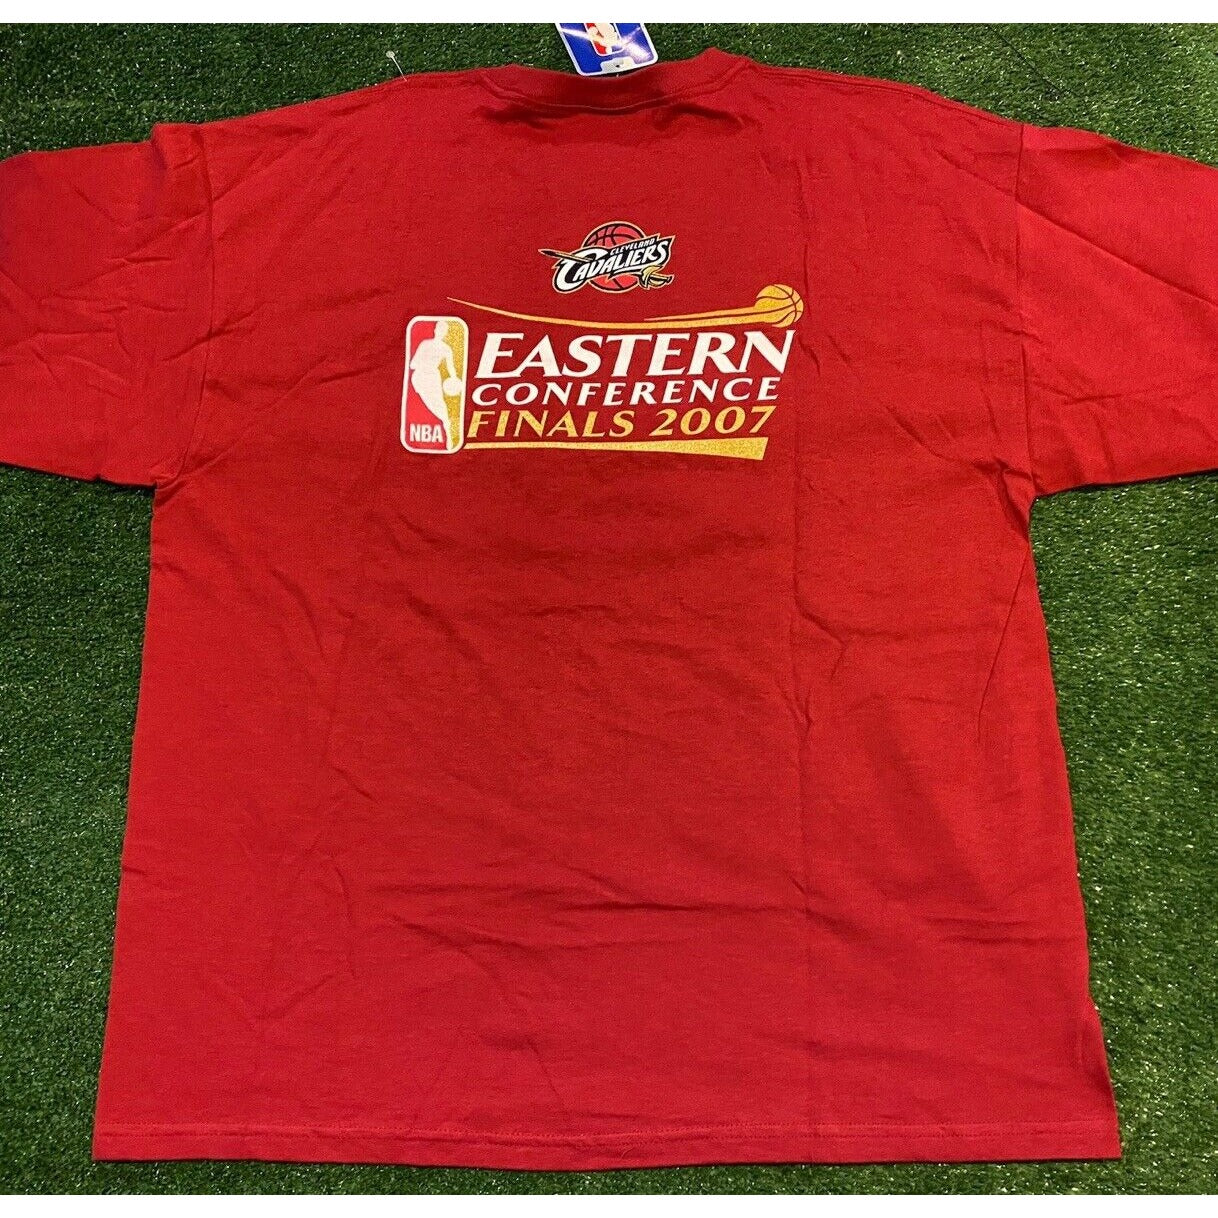 Retro Y2K Cleveland Cavaliers Rise Up 2007 Eastern Conference Finals t-shirt XL